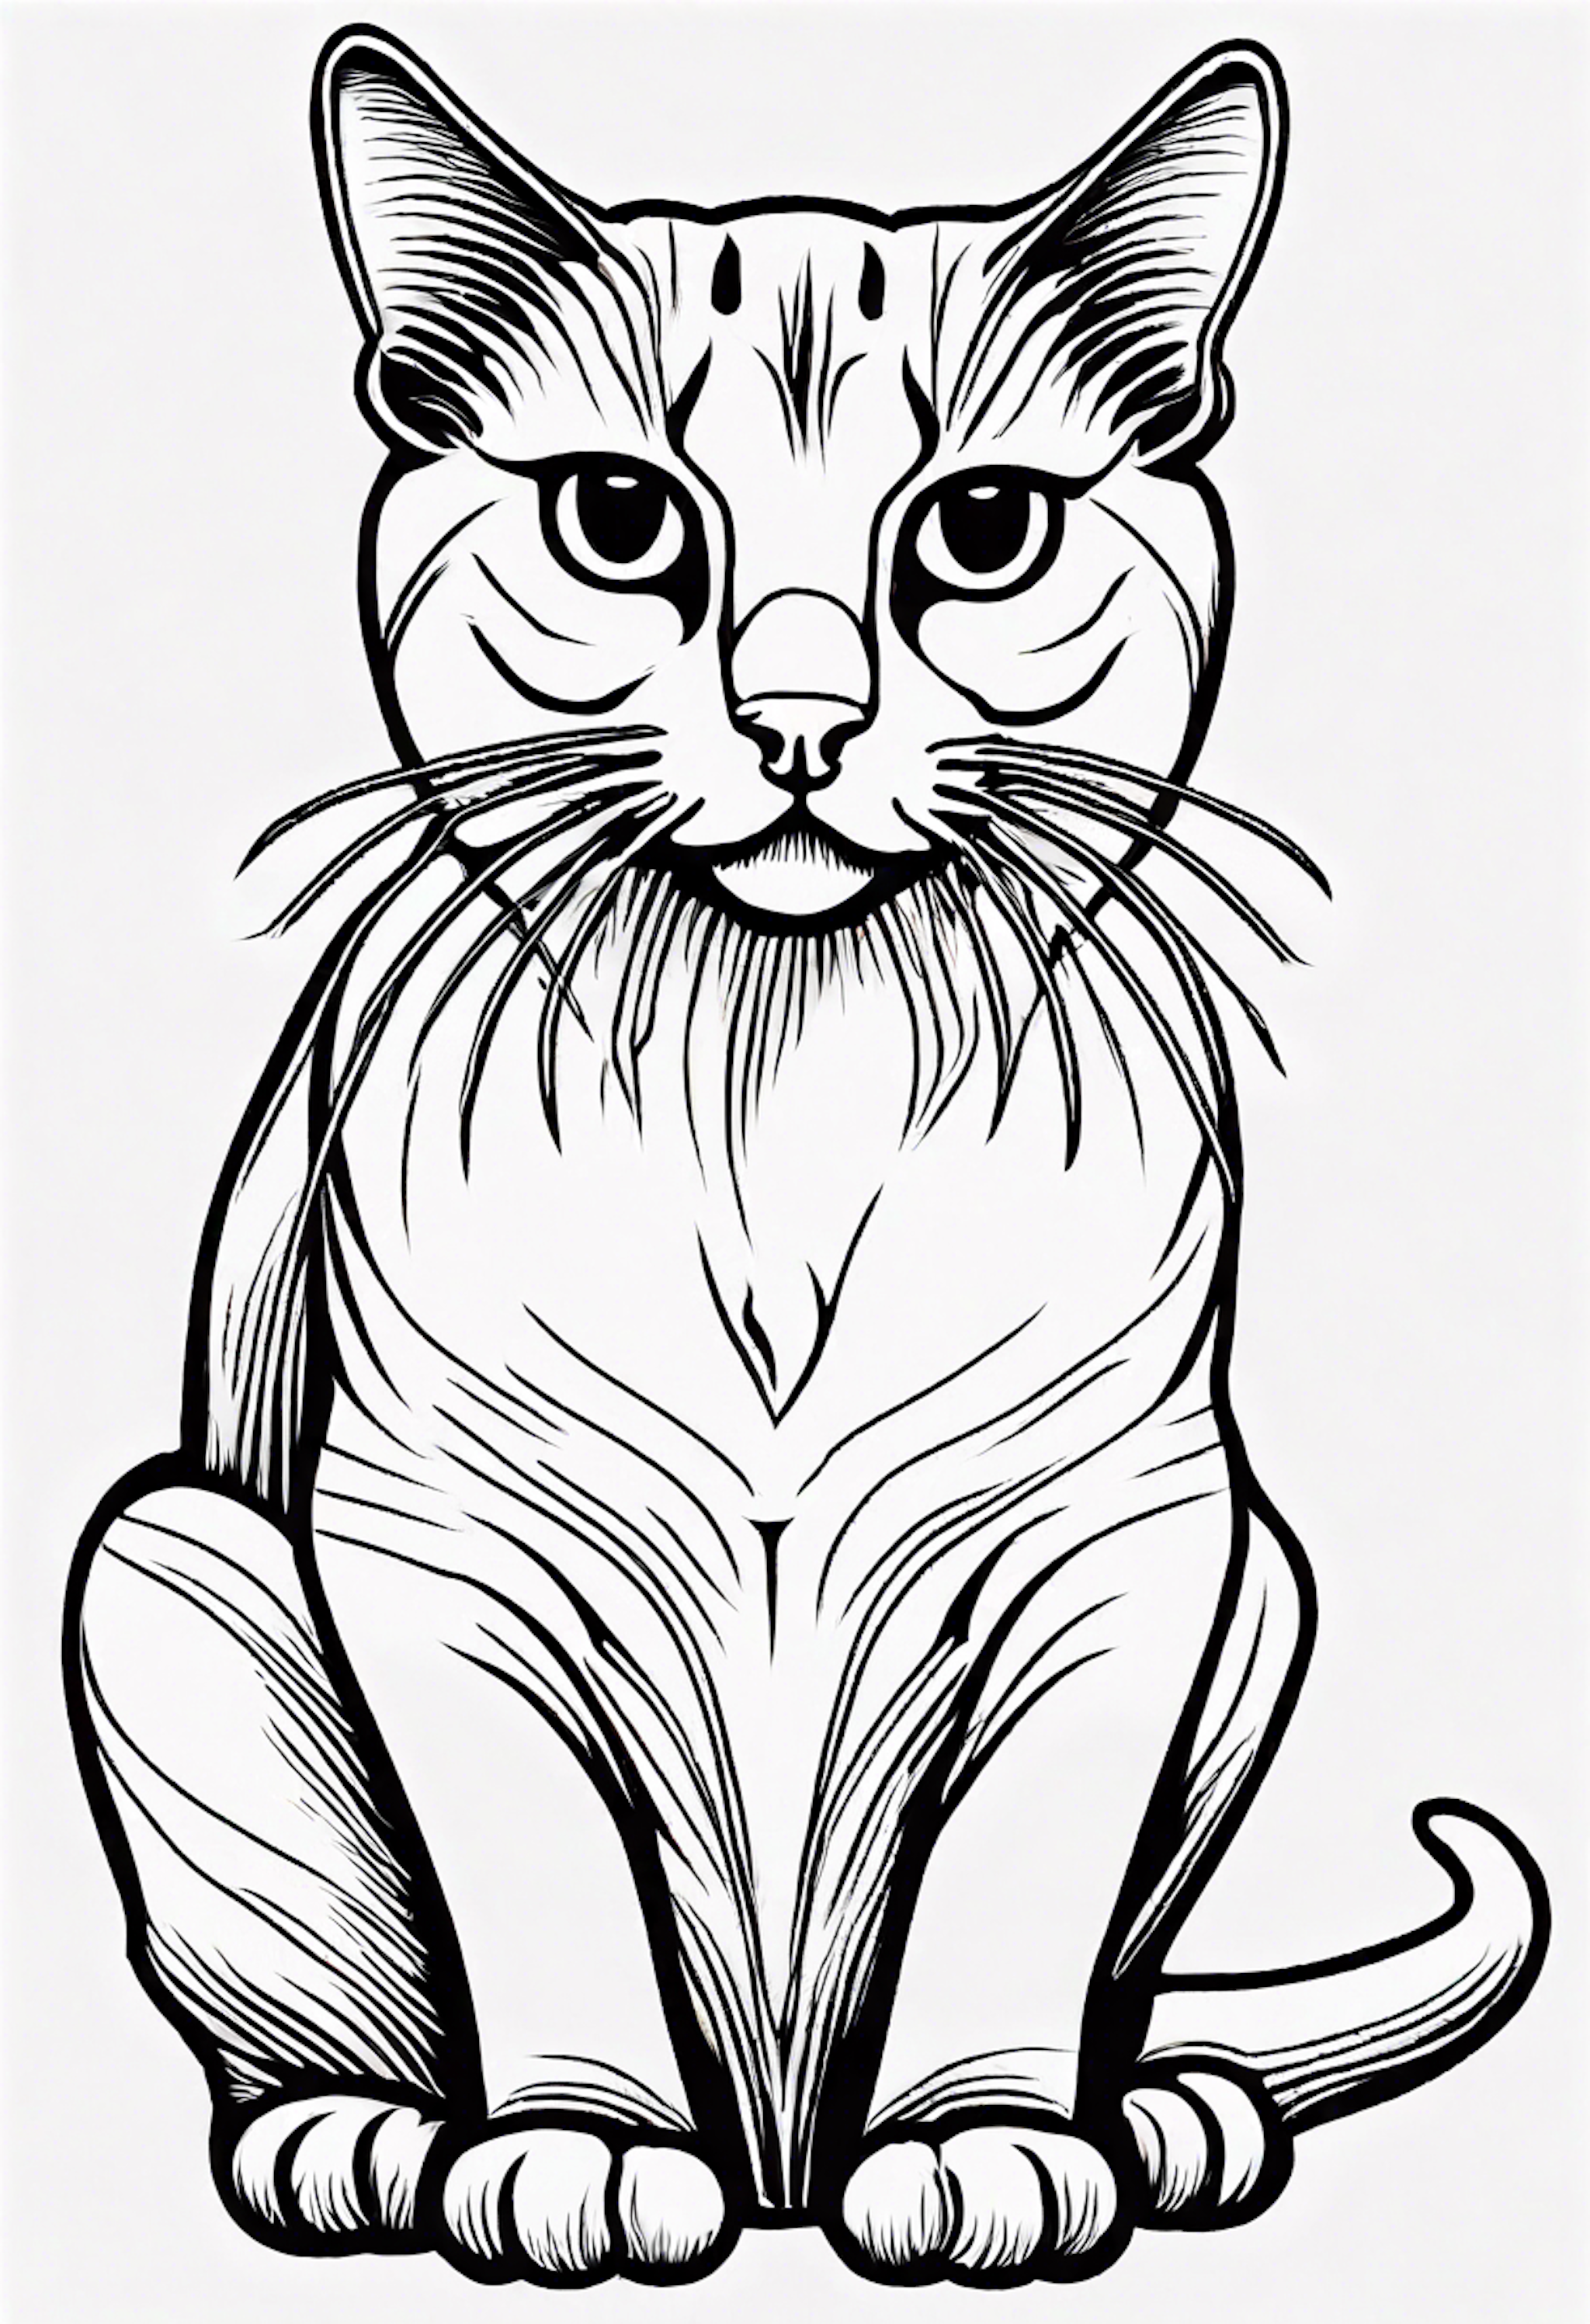 A coloring page for 1 Cat coloring pages